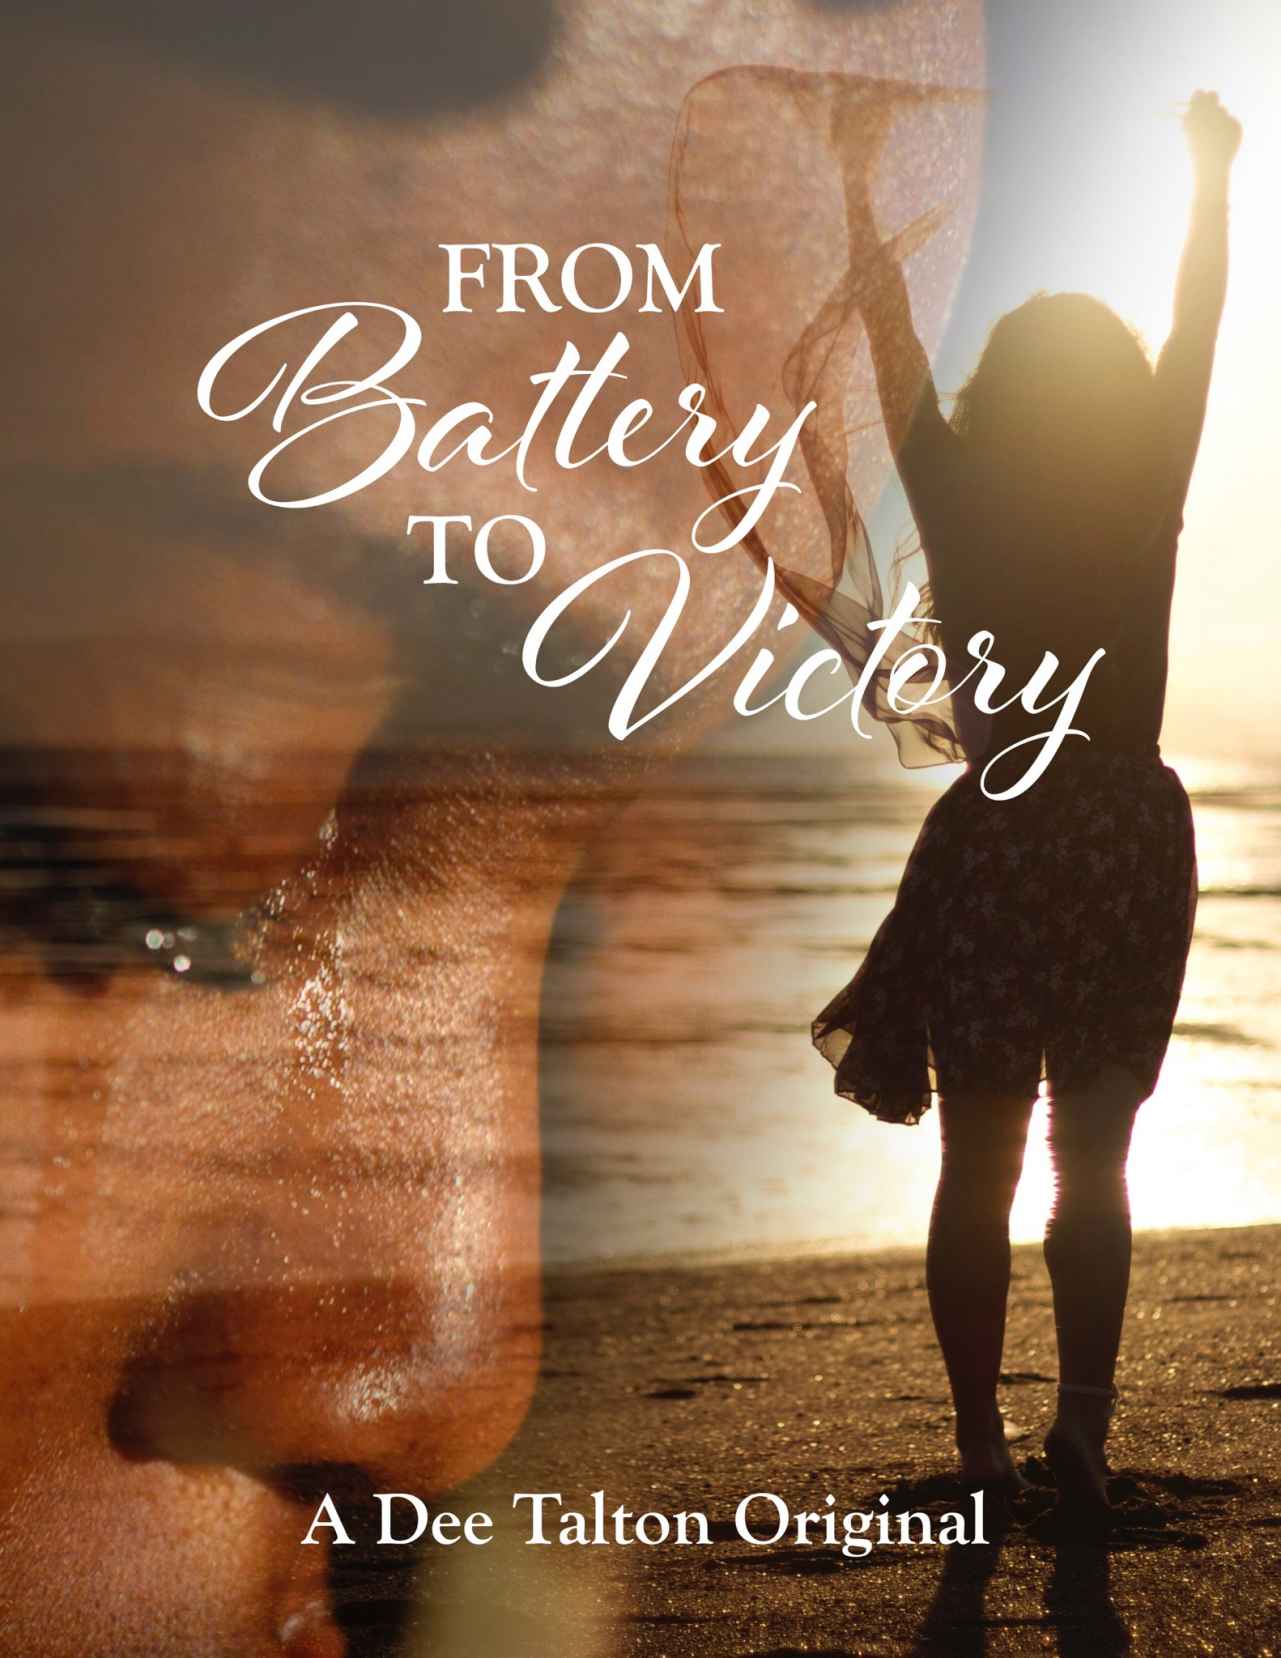 FREE: From Battery to Victory by Dee Talton